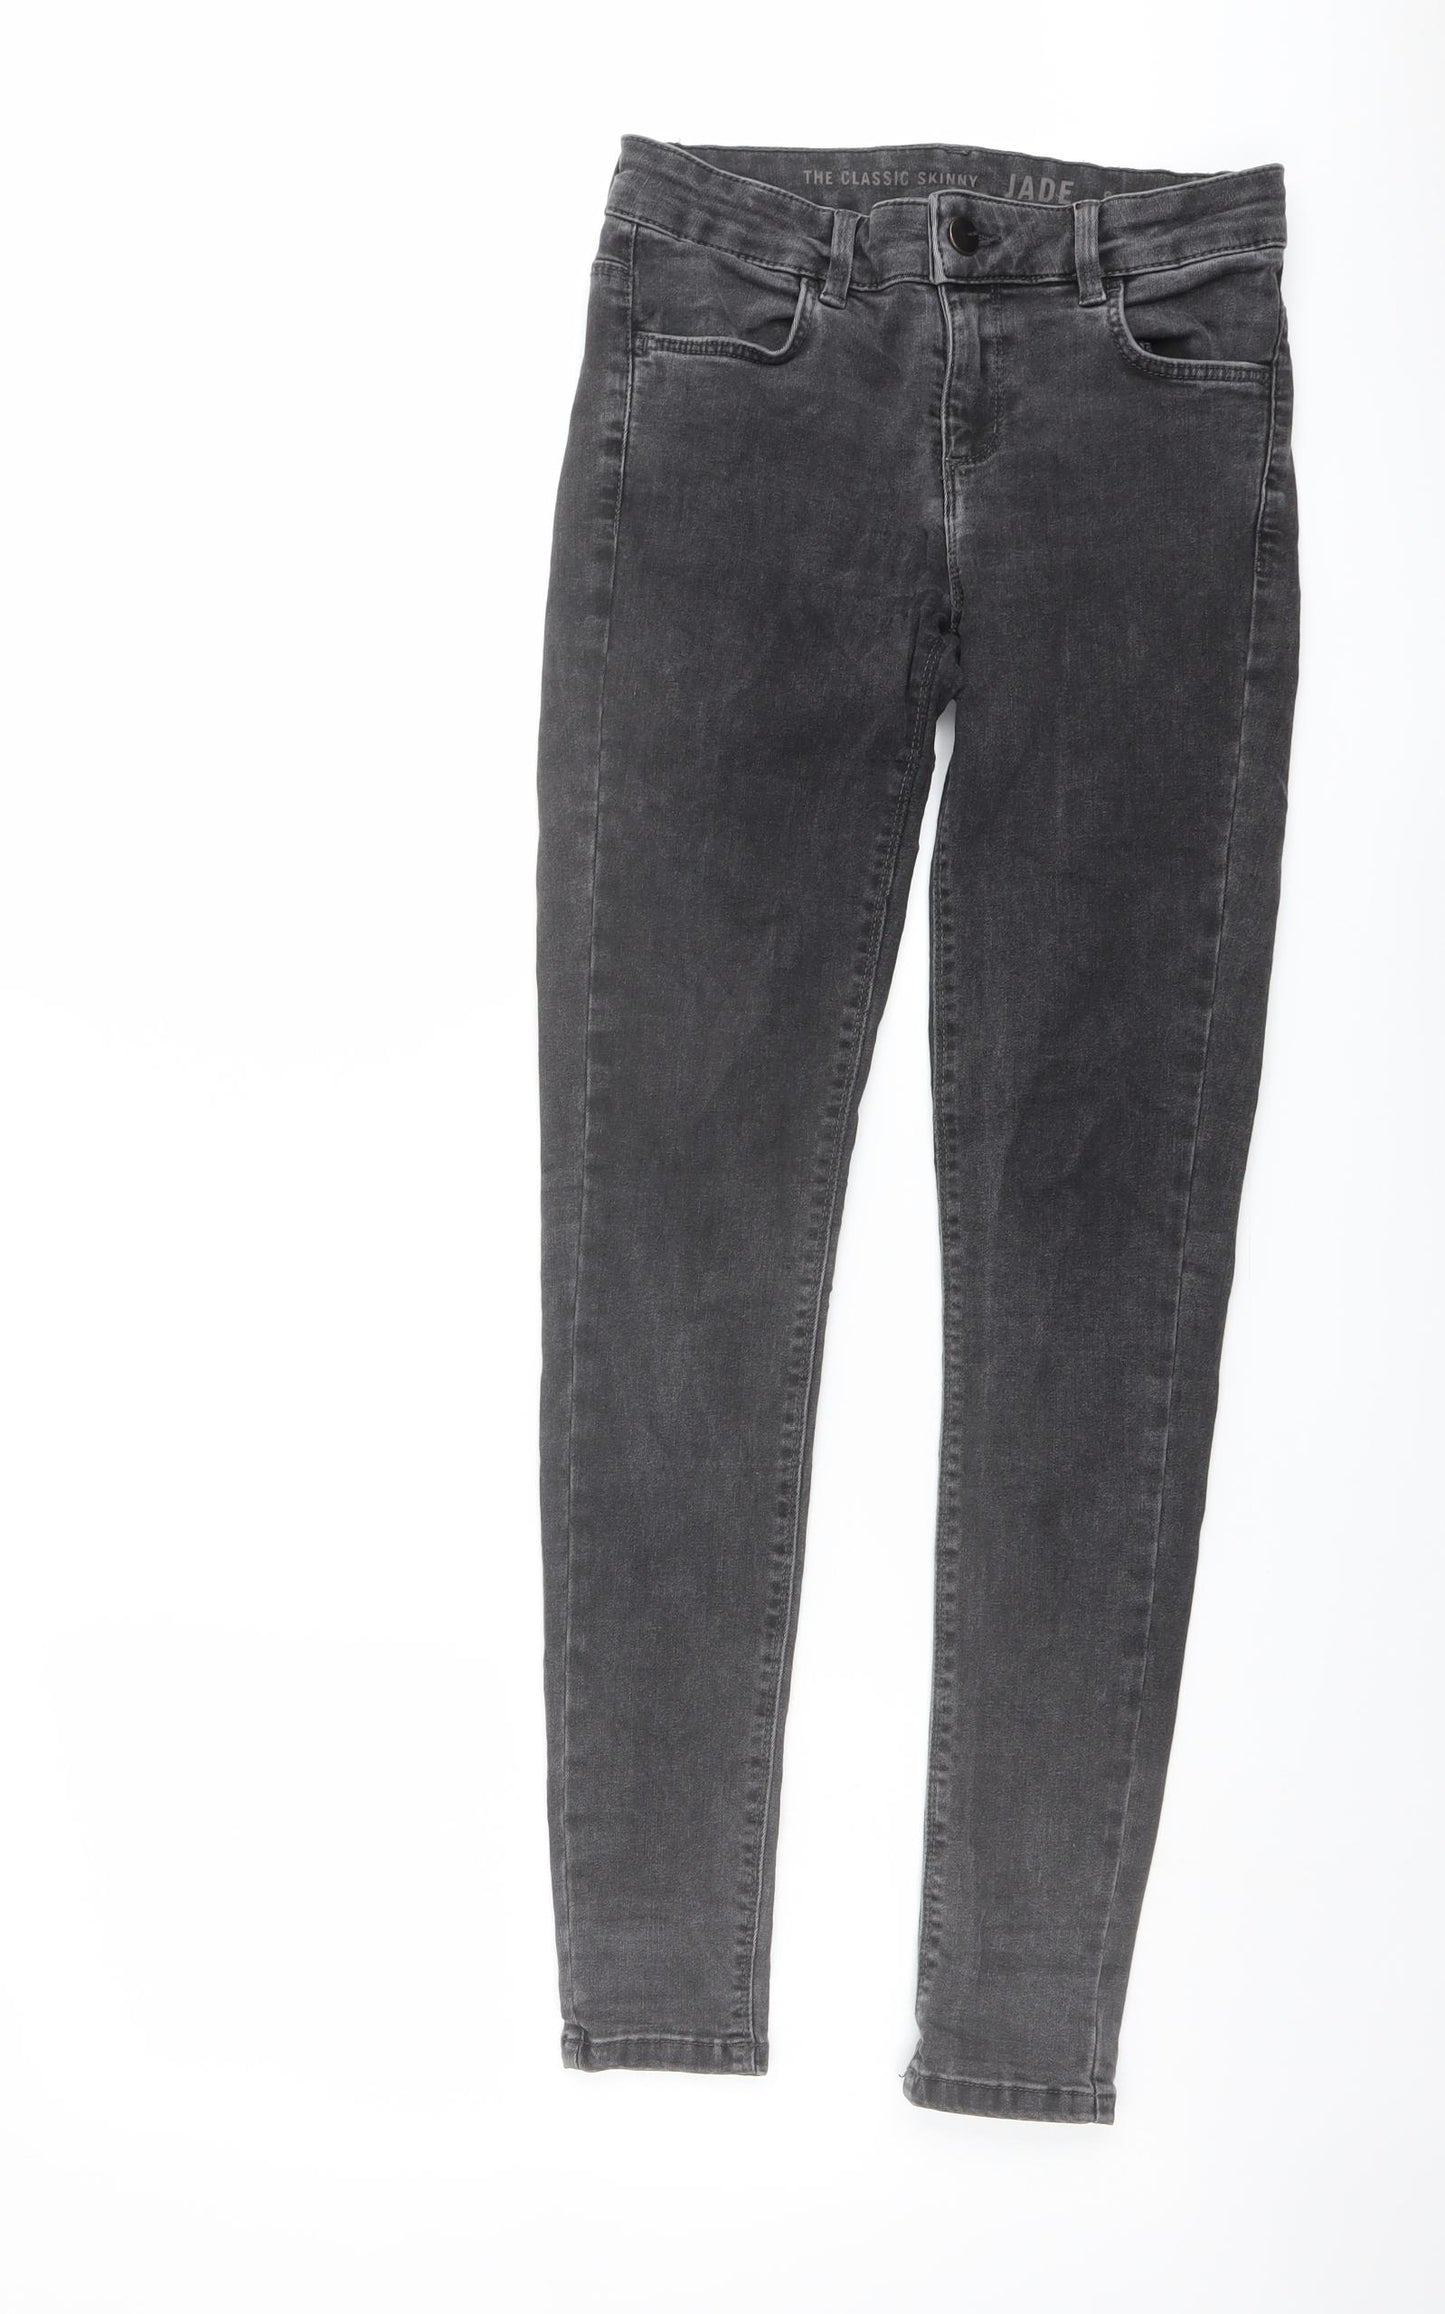 Oasis Womens Grey Cotton Skinny Jeans Size 8 L28 in Regular Button